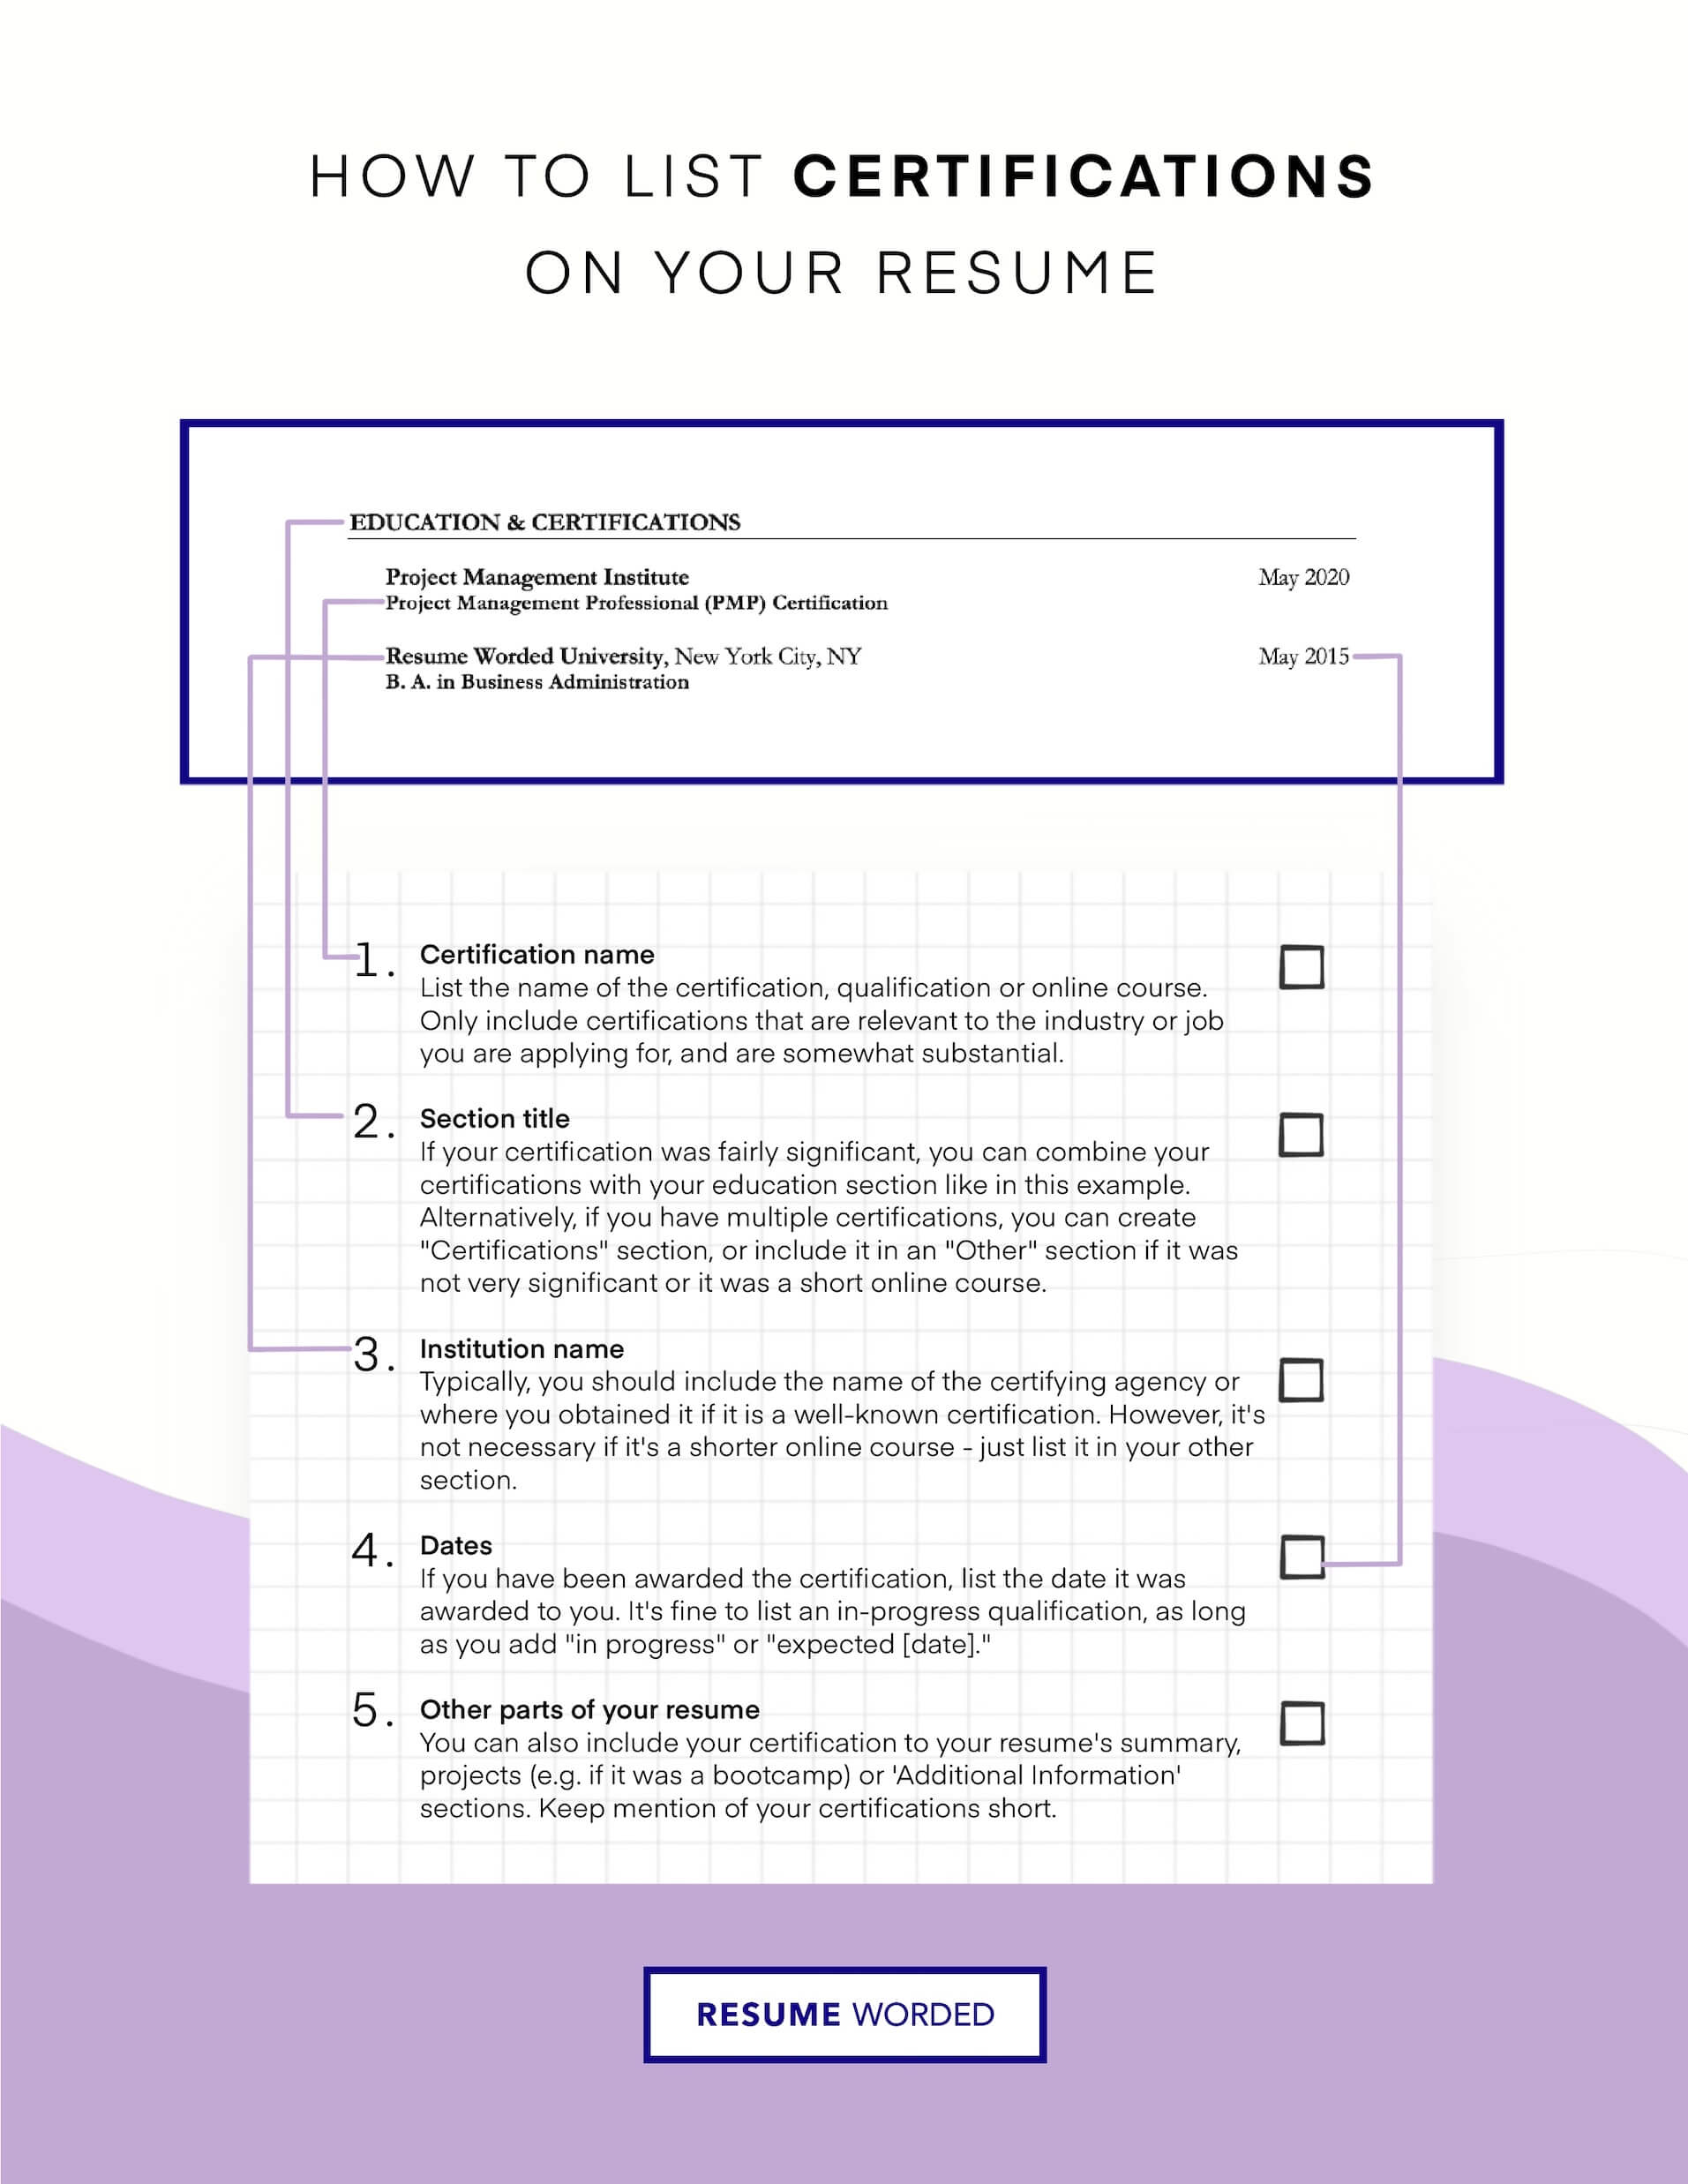 Highlight Certifications and Education - Charge Nurse Resume